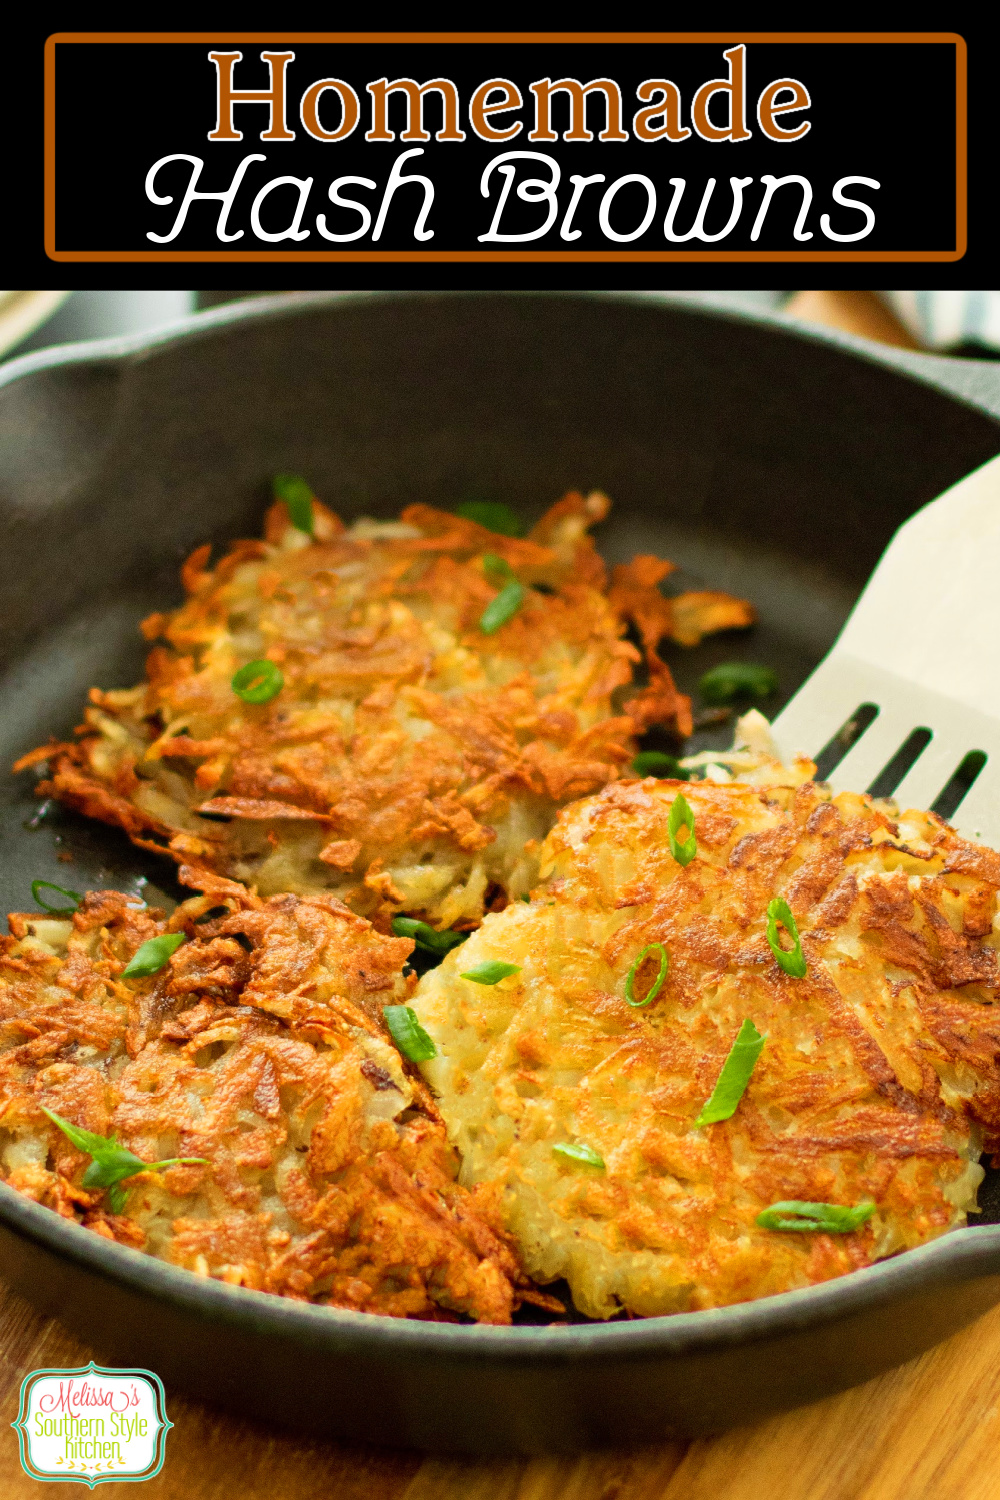 These Homemade Hash Browns are the perfect side dish for breakfast, brunch, lunch or dinner. #hahsbrowns #potatoes #hashbrownpotatoes #easypotatorecipes #breakfastrecipes #southernhashbrowns #hashbrownrecipes